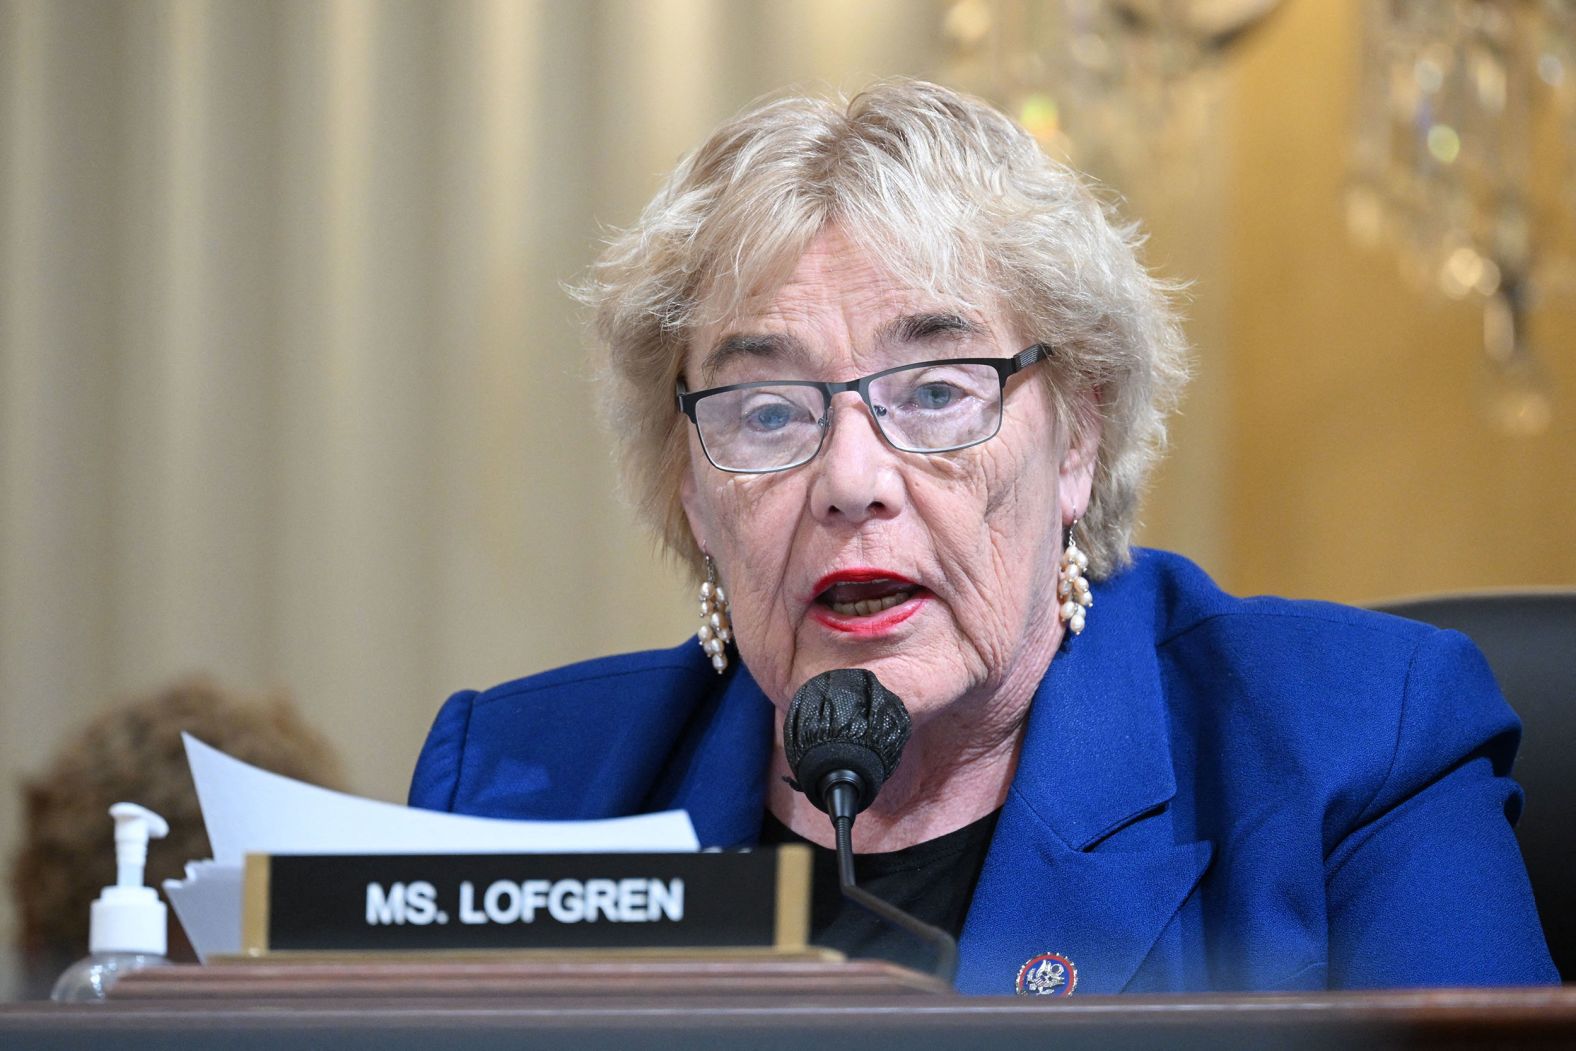 US Rep. Zoe Lofgren, one of the committee members, speaks during proceedings on October 13. The committee <a href="index.php?page=&url=https%3A%2F%2Fwww.cnn.com%2Fpolitics%2Flive-news%2Fjan-6-hearing-livestream-10-13-2022%23h_b11a1b077e0a7734c1e03434945c0dd7" target="_blank">revealed new evidence</a> that Trump had a premeditated plan to declare victory no matter what the election results were. "The evidence shows that his false victory speech was planned well in advance, before any votes had been counted," Lofgren said.